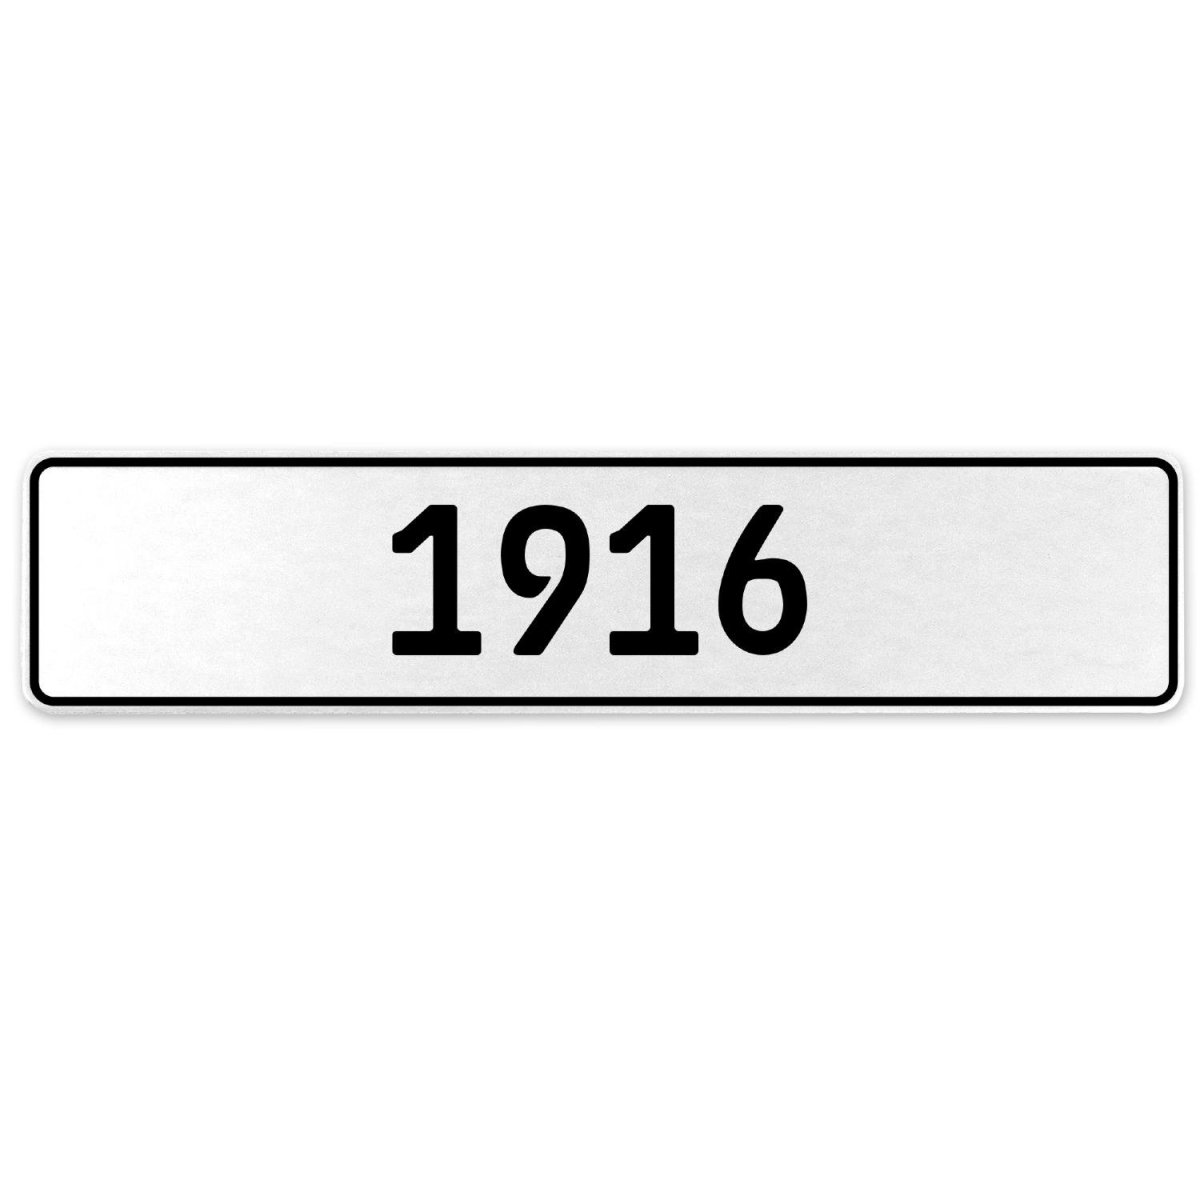 553159 1916 Year - White Aluminum Street Sign Mancave Euro Plate Name Door Sign Wall